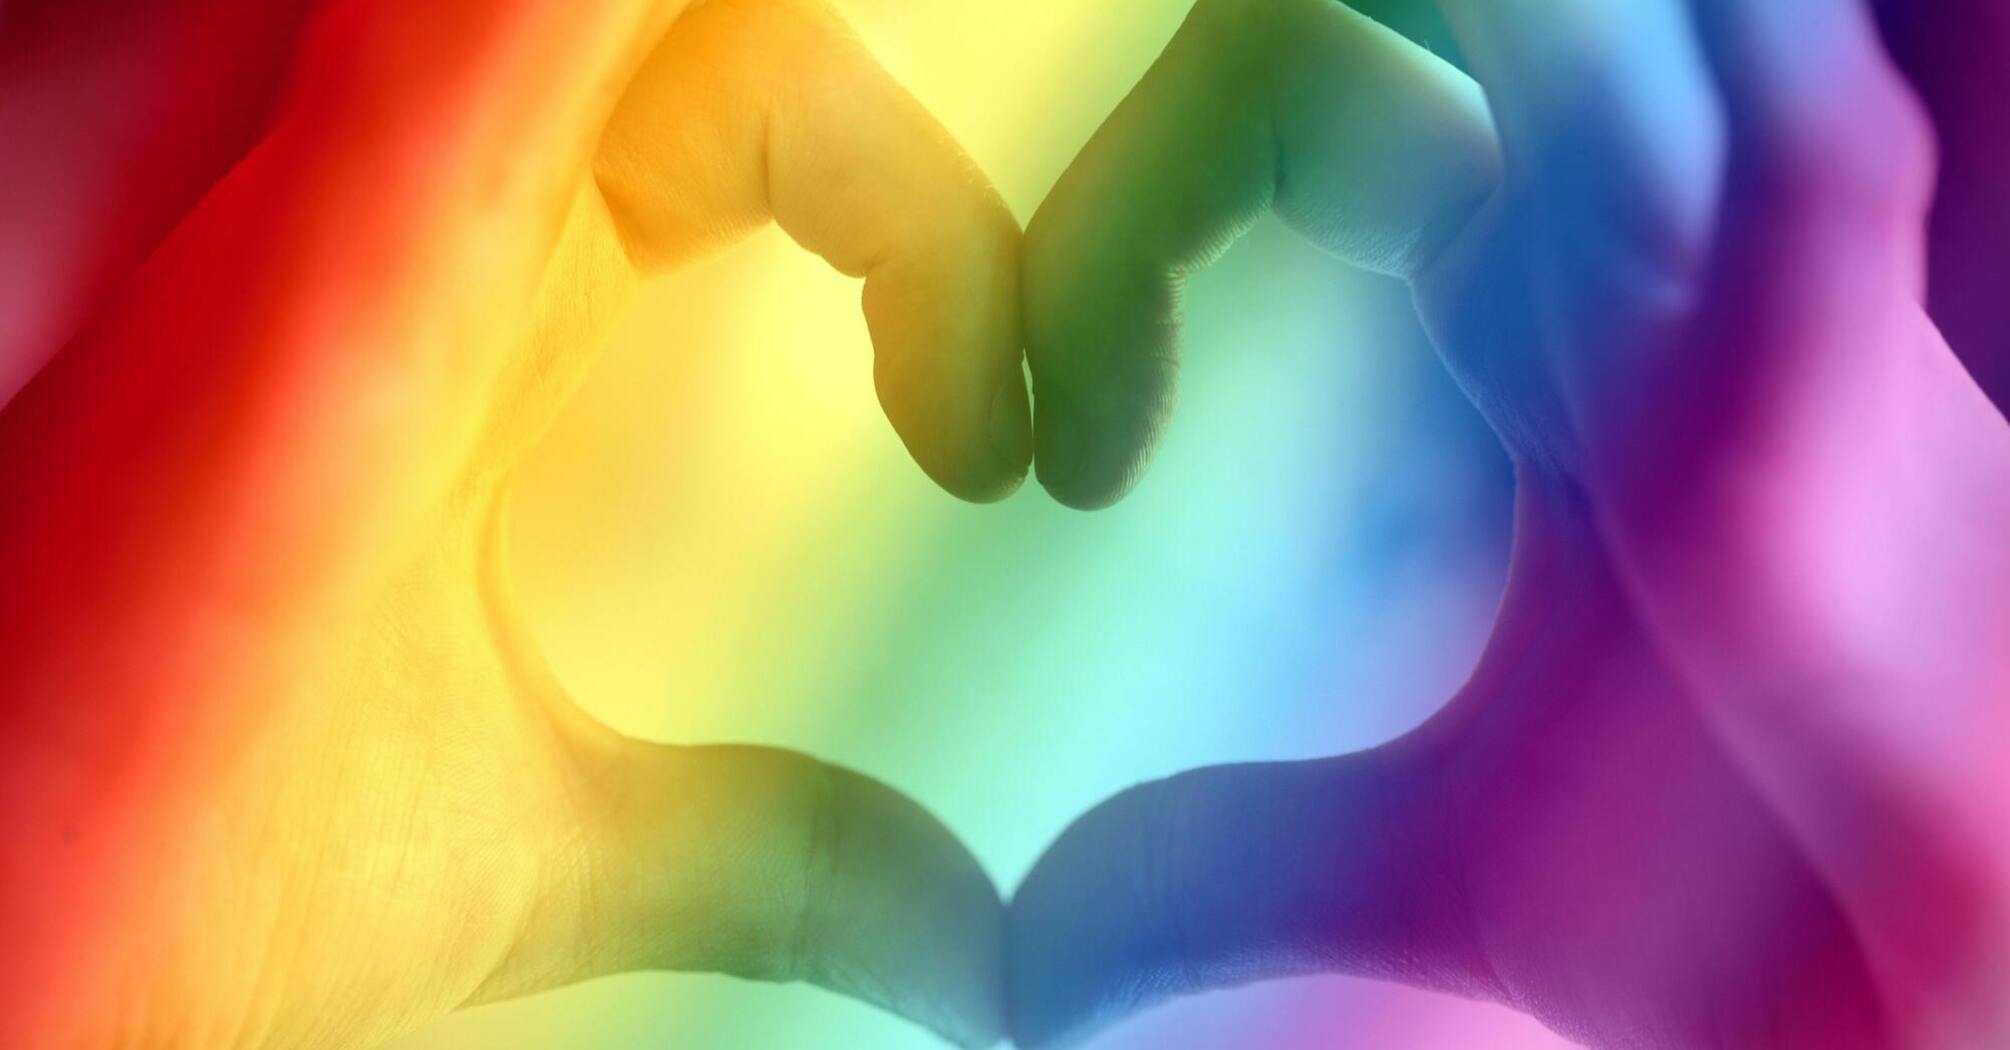 Two hands forming a heart shape against a vibrant rainbow background